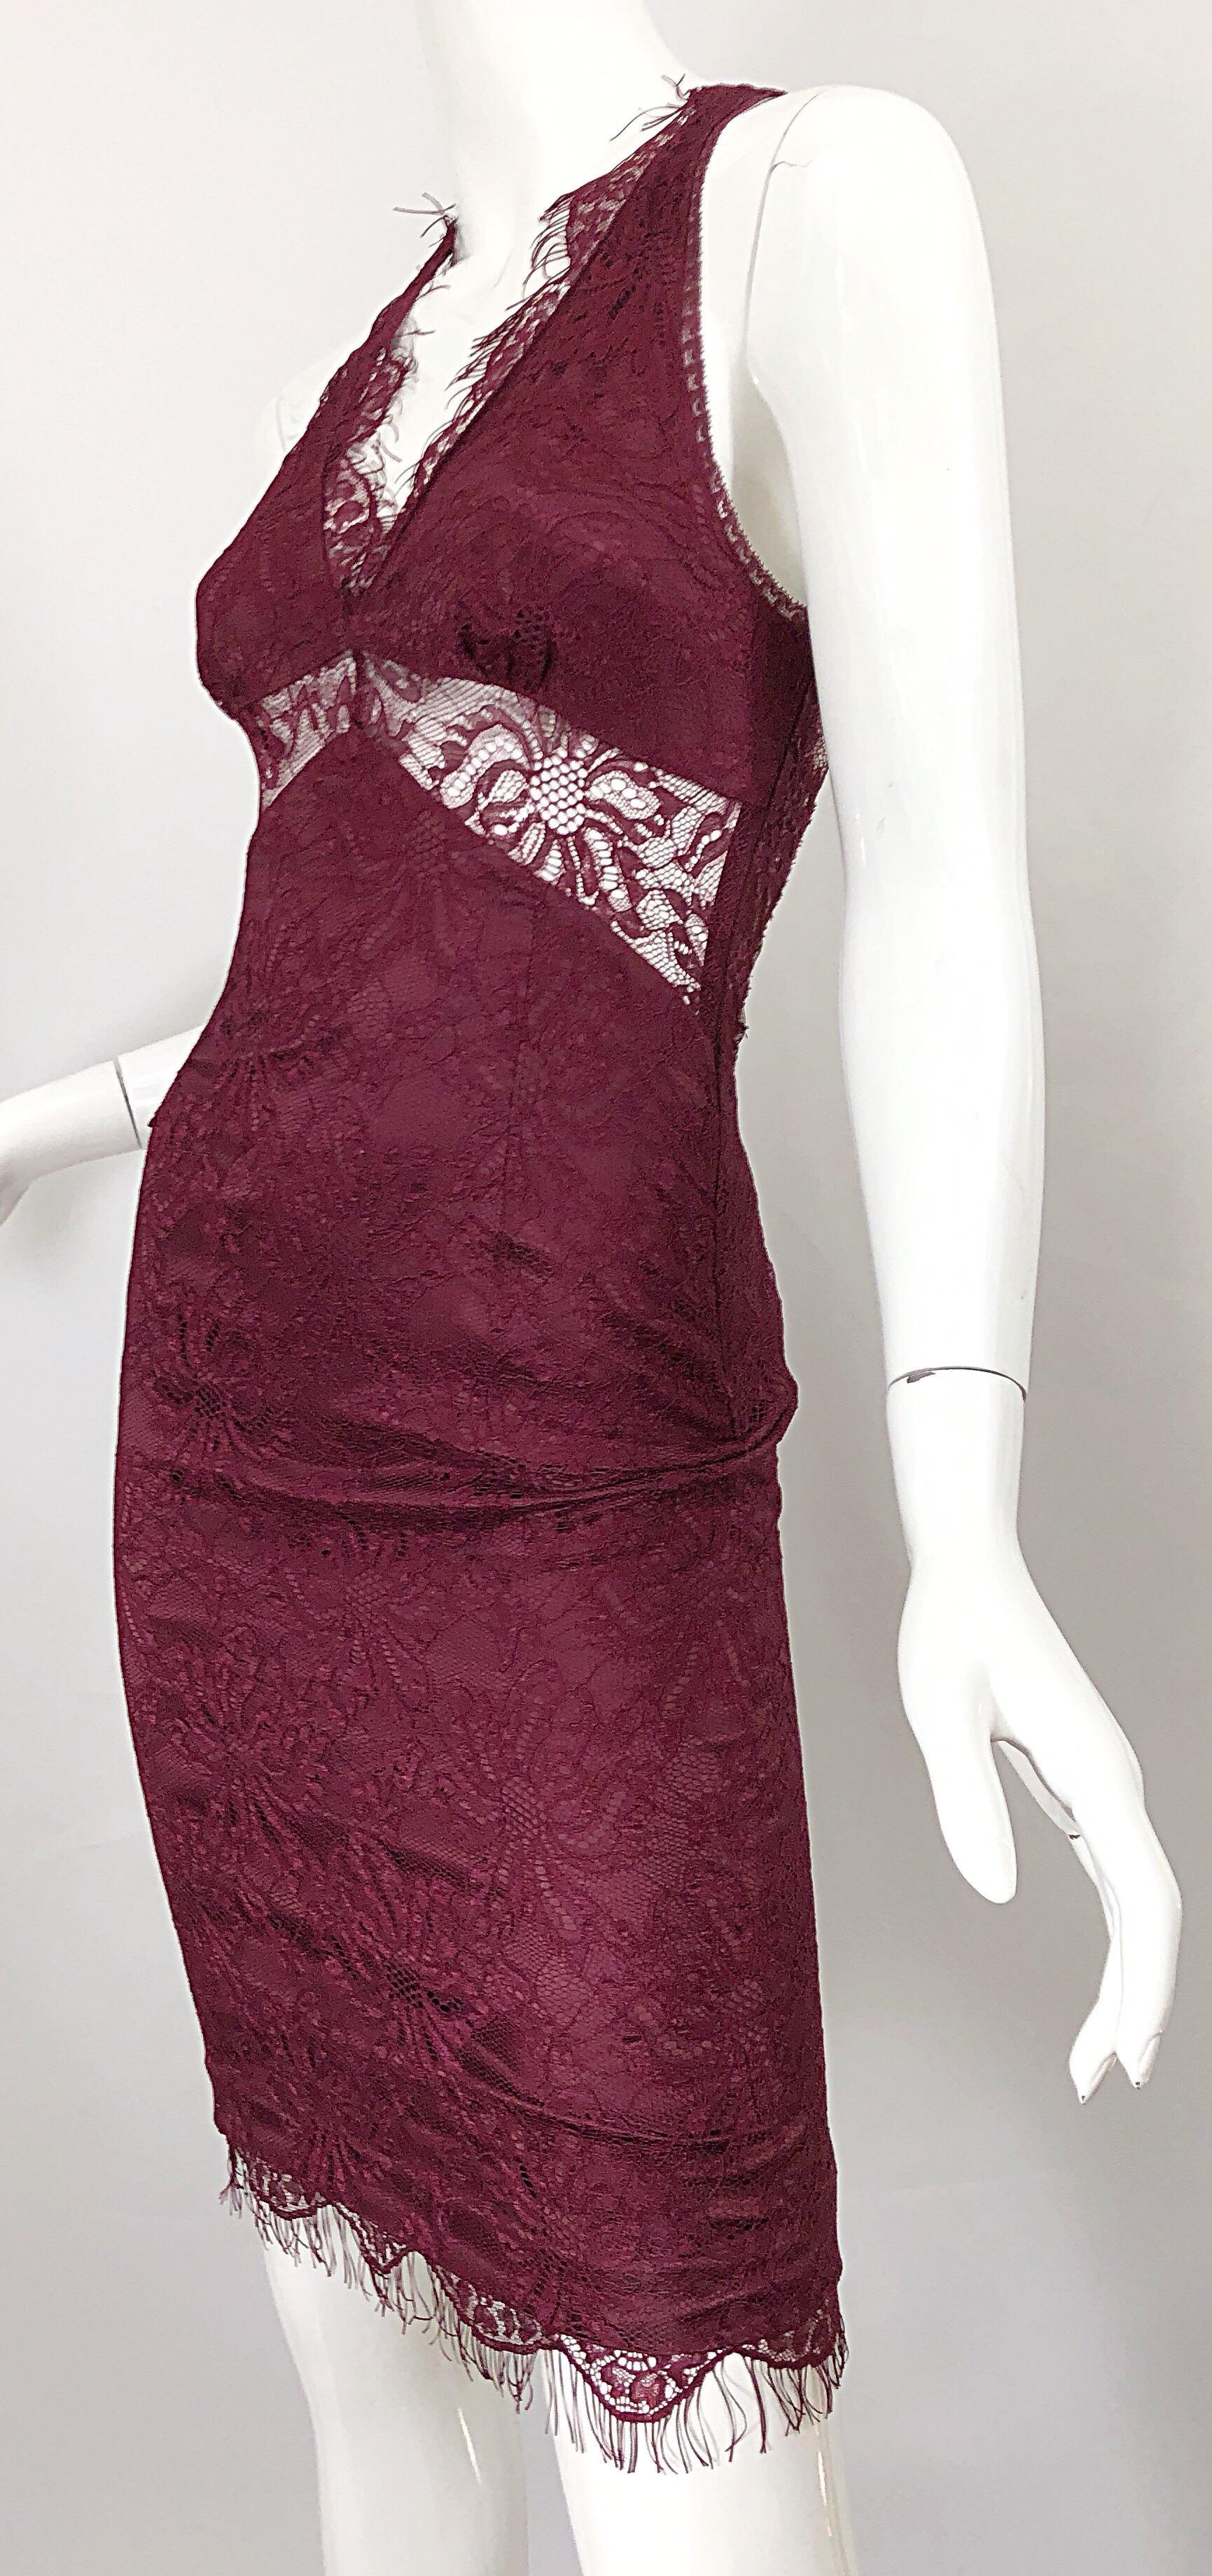 Dolce & Gabbana 1990s Burgundy Merlot Sexy Lace Bodycon Cut Out Vintage Dress 38 For Sale 2